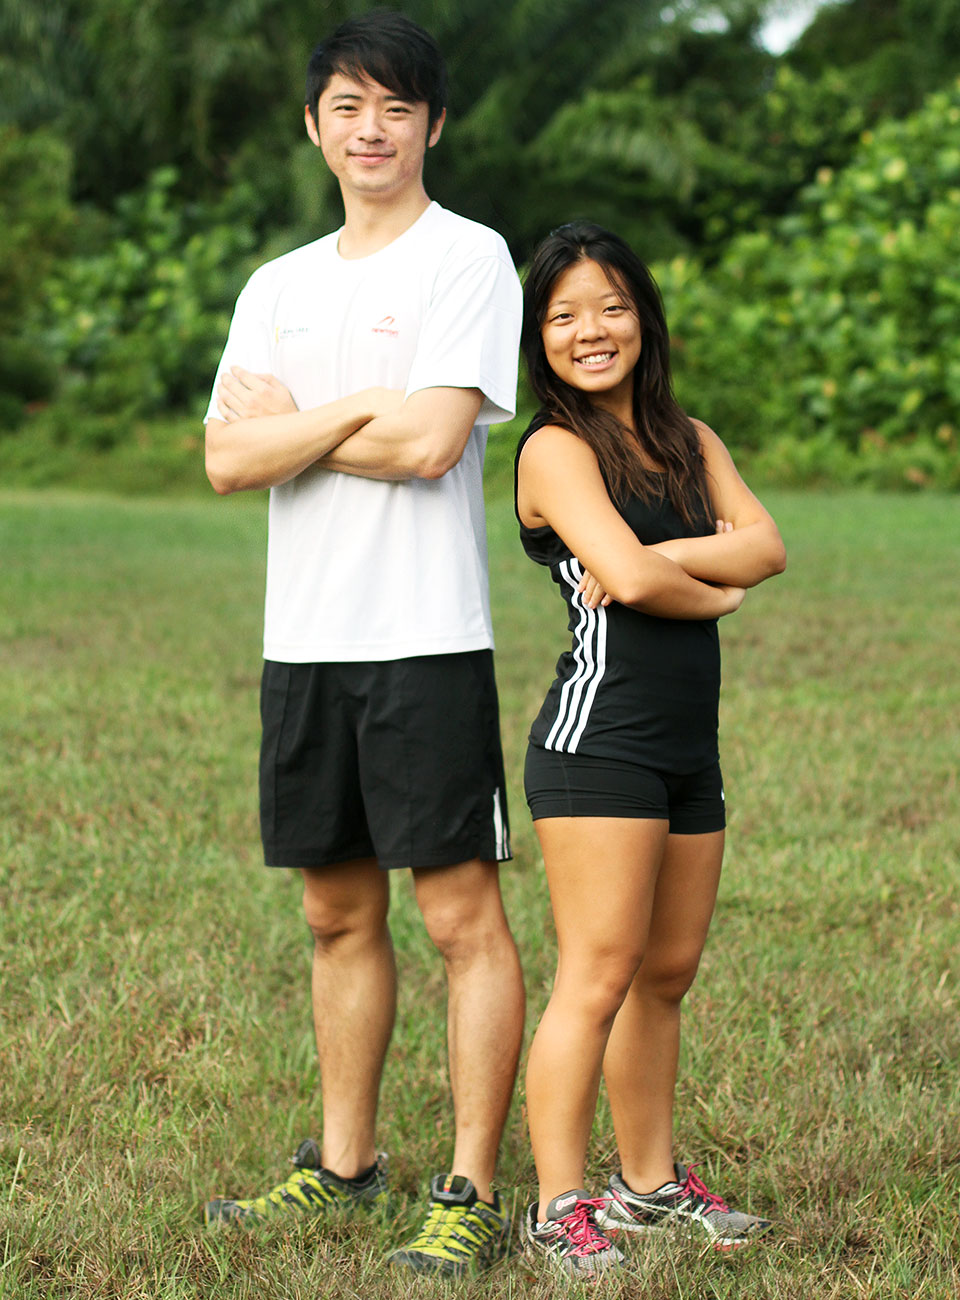 Meet Alexis and John: The Youngest Duo Registered for Desert Huge Ultra—Gobi March 2015!